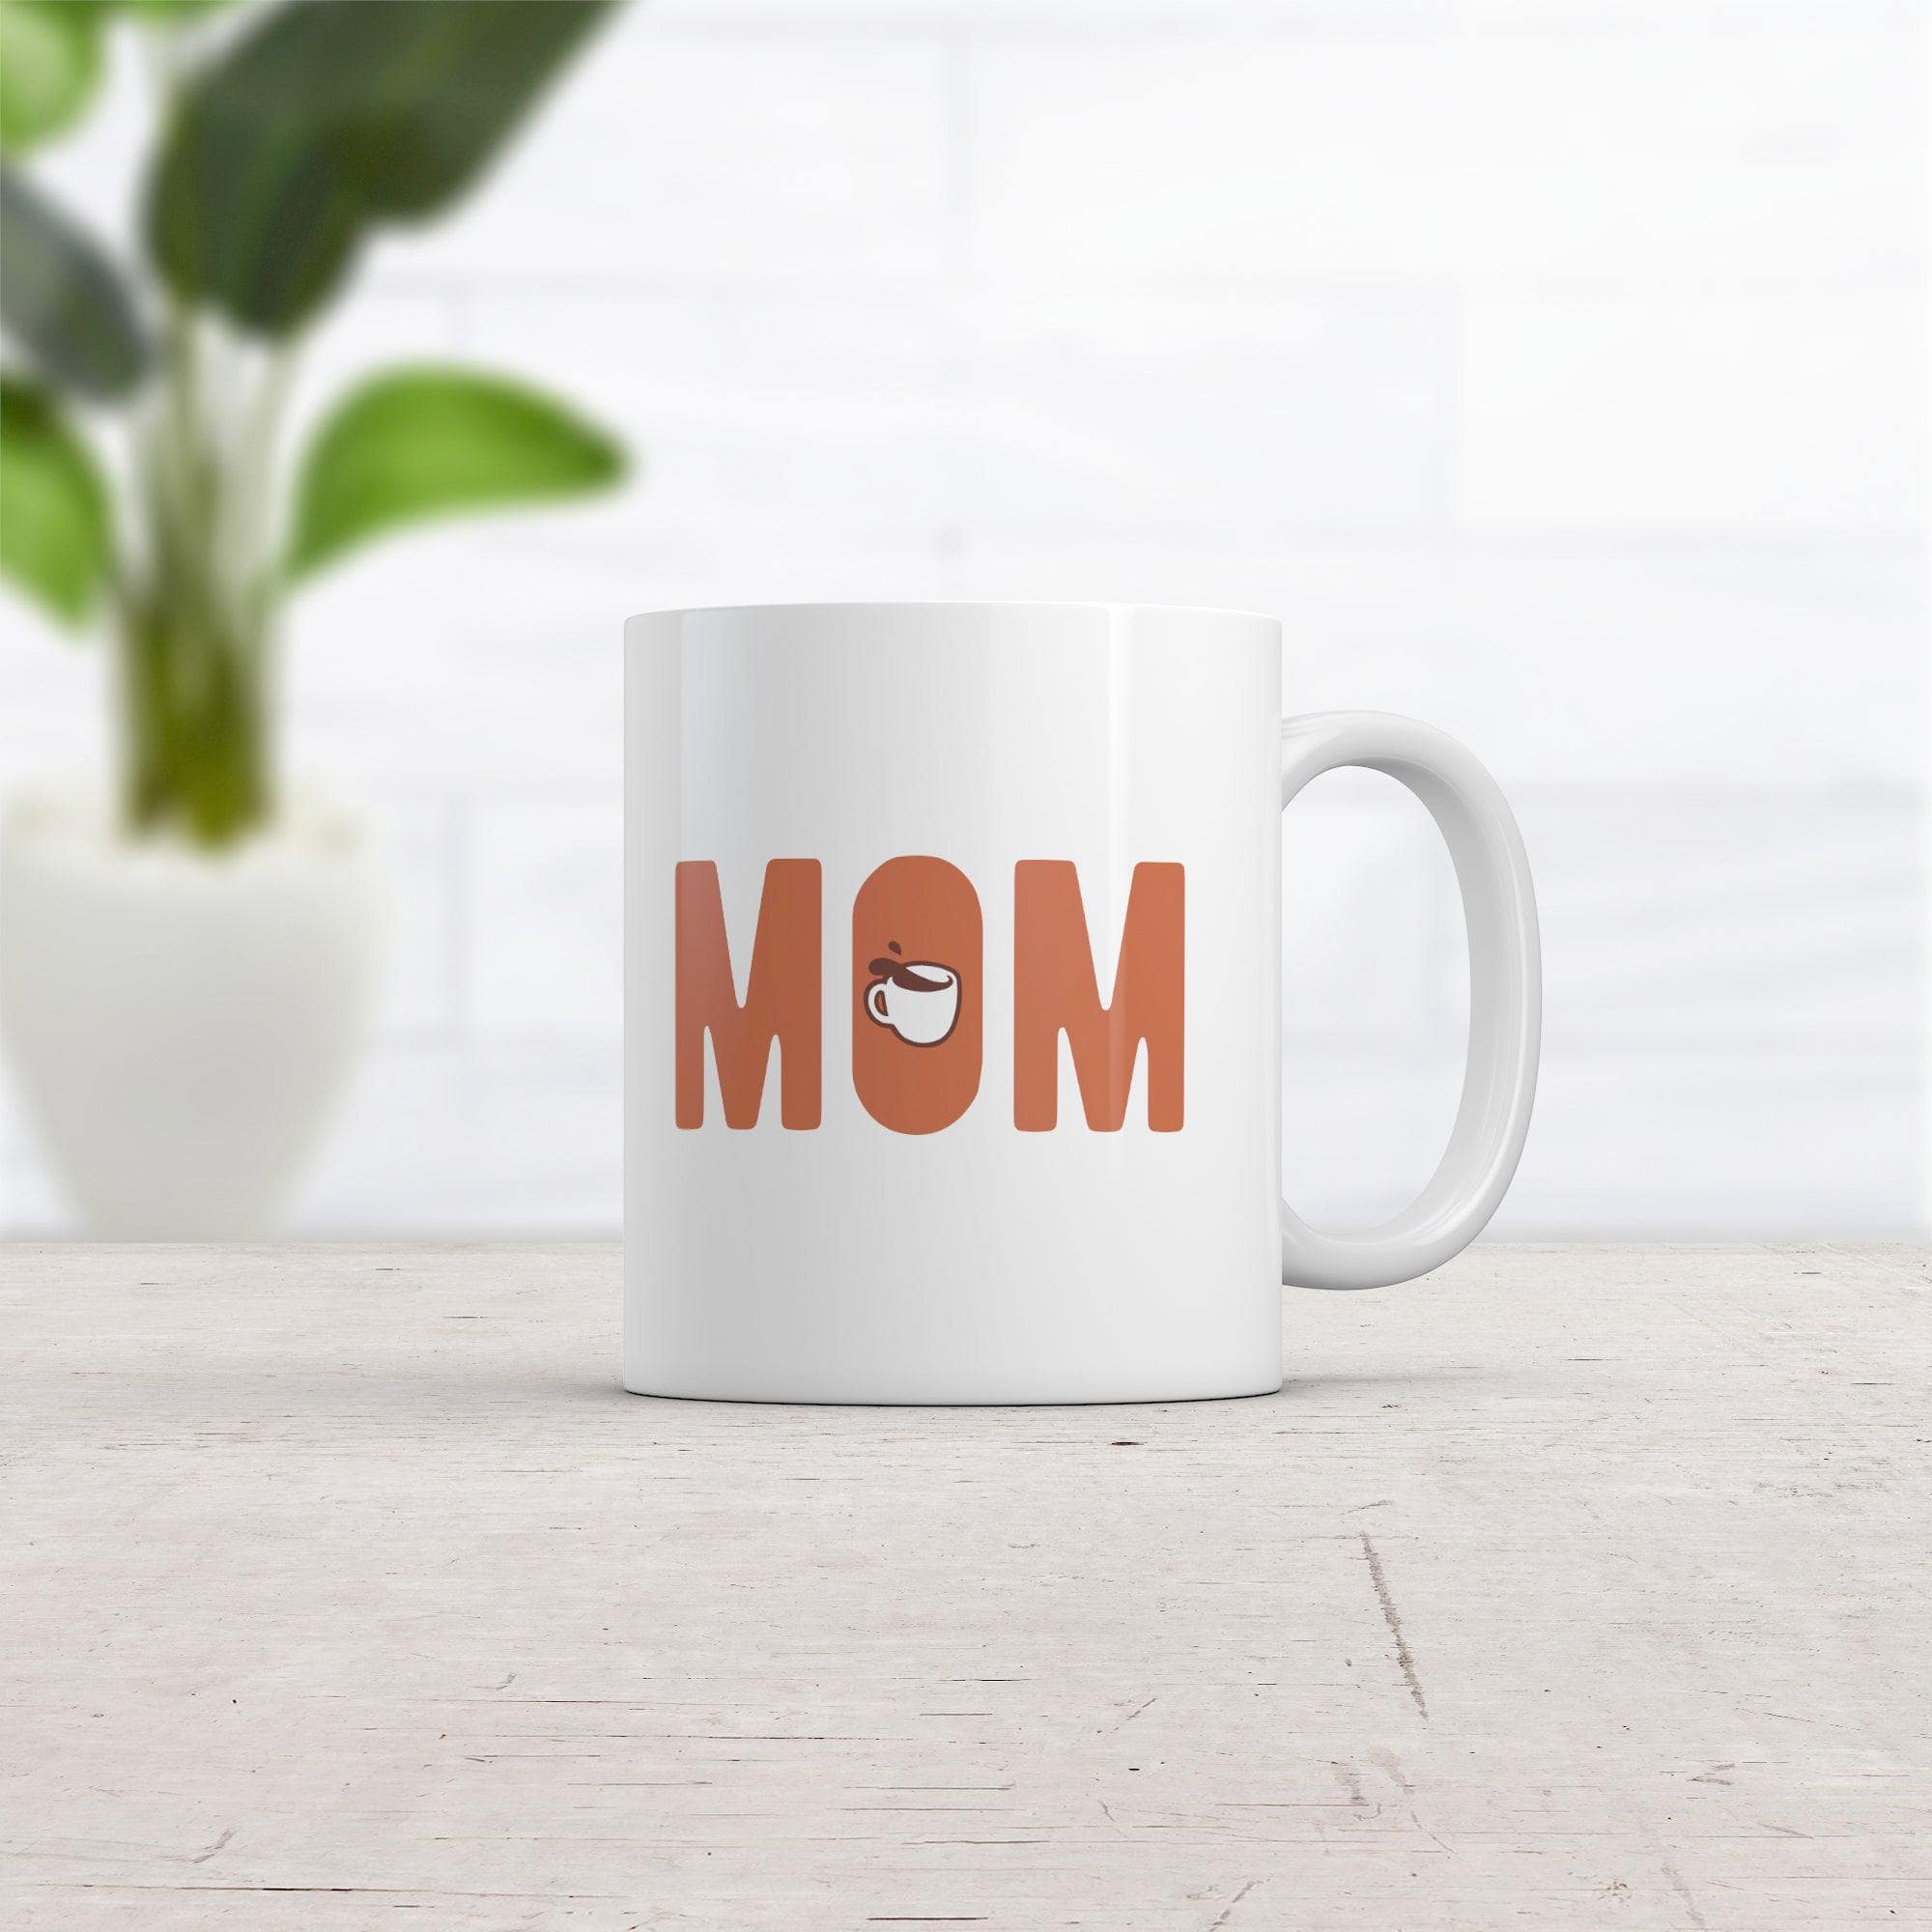 Mom Coffee Mug Funny Cool Mother's Day Gift Caffeine Lovers Graphic Novelty Cup-11oz  -  Crazy Dog T-Shirts